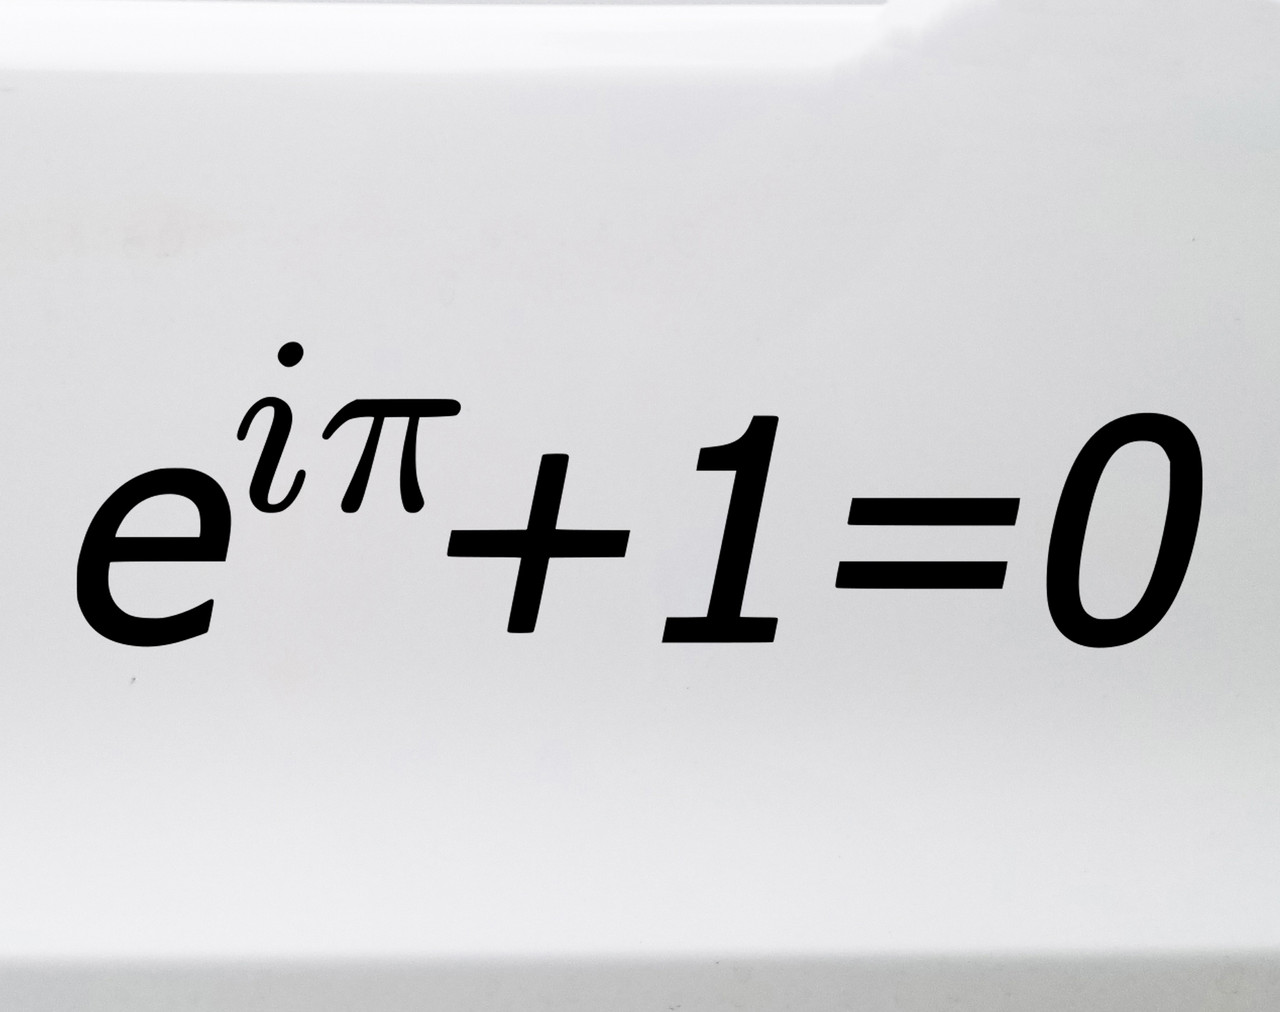 Euler's Identity Formula Vinyl Decal - Mathematic Equation - Die Cut Decal
